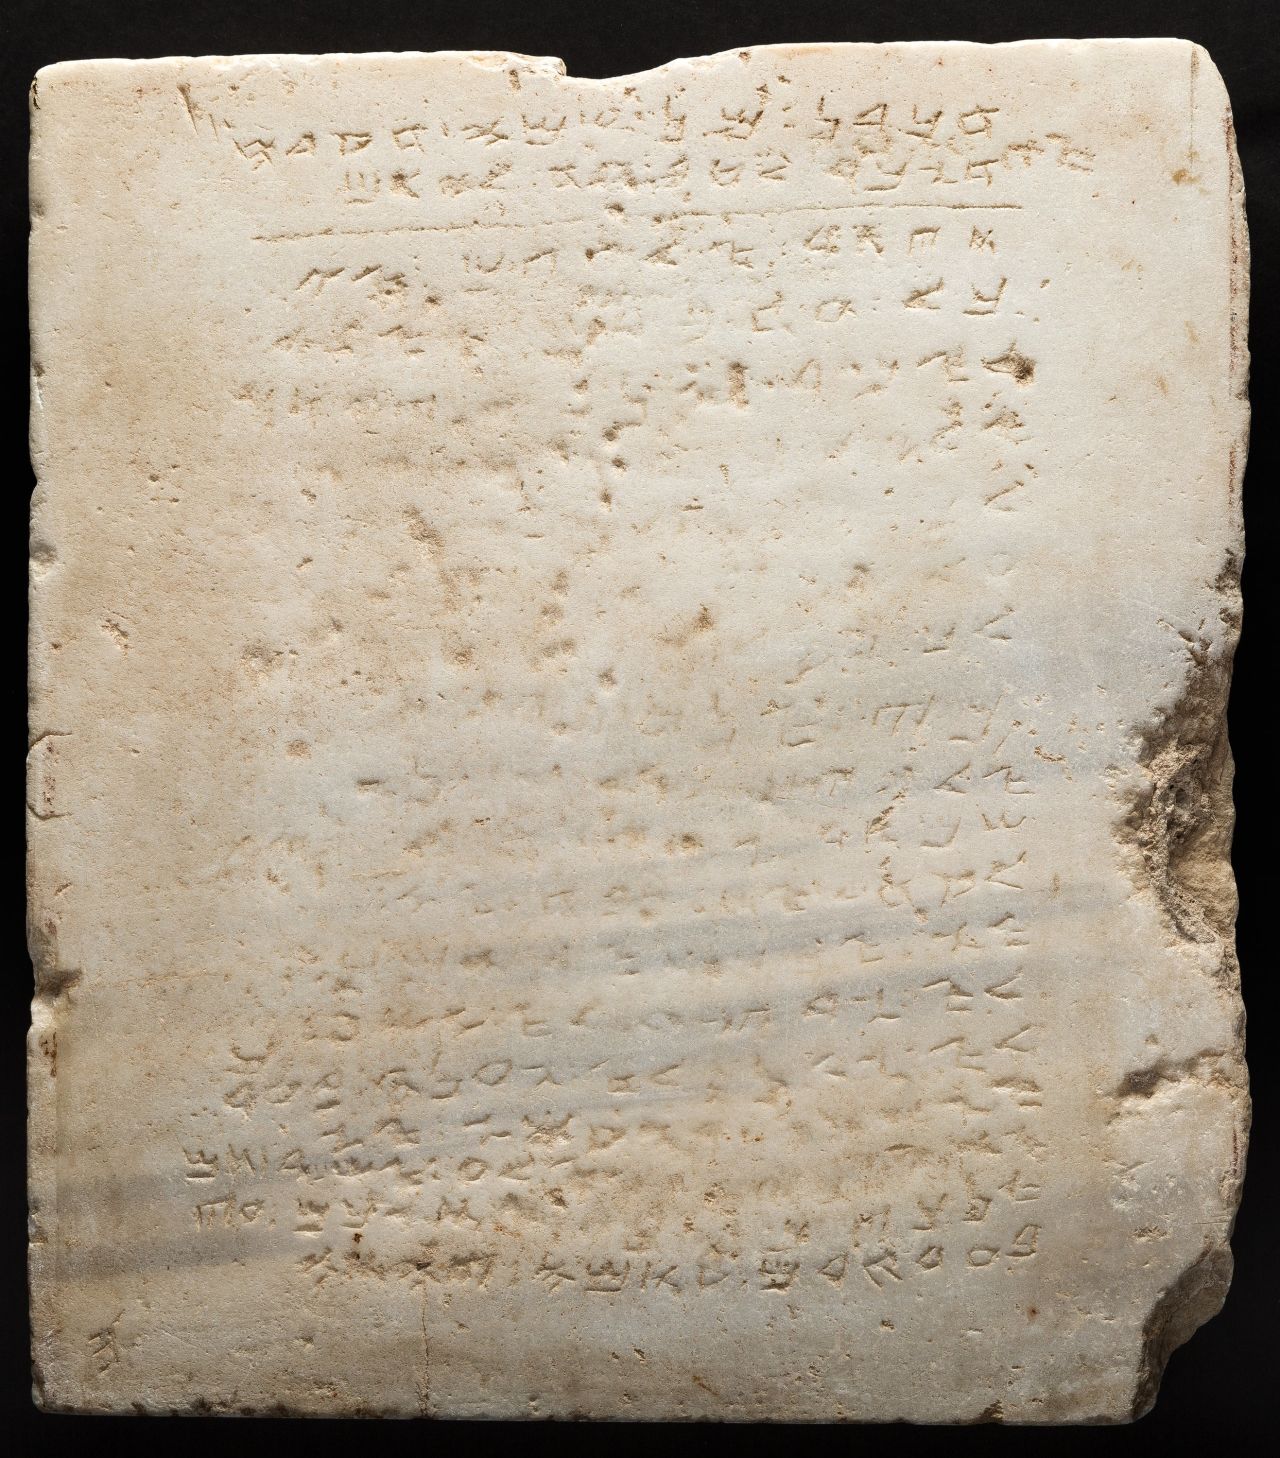 Bidding for this ancient tablet of the 10 Commandments will start at $250,000.